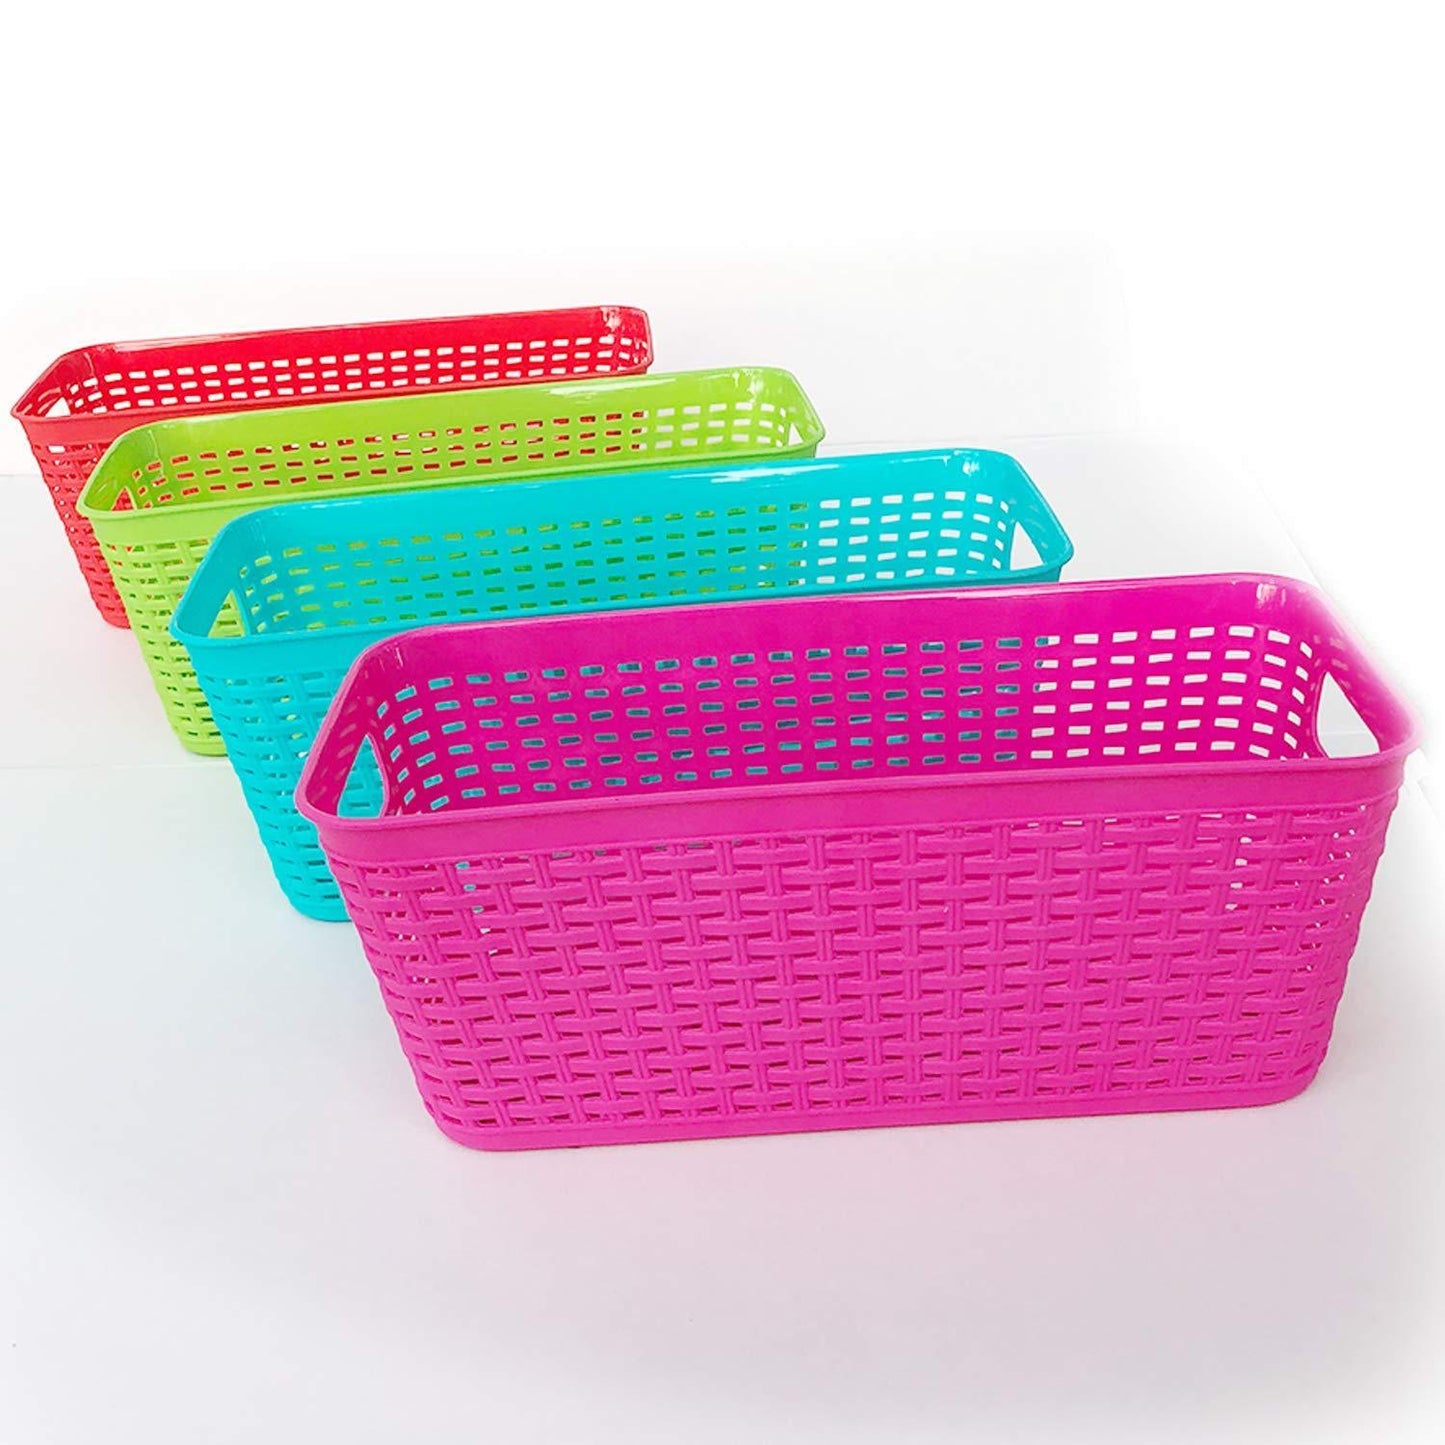 Budget plastic baskets pantry organization and storage kitchen cabinet spice rack organizer for food shelf small colorful rectangle tray organizing for desks drawers weave deep closets art lockers set of 4